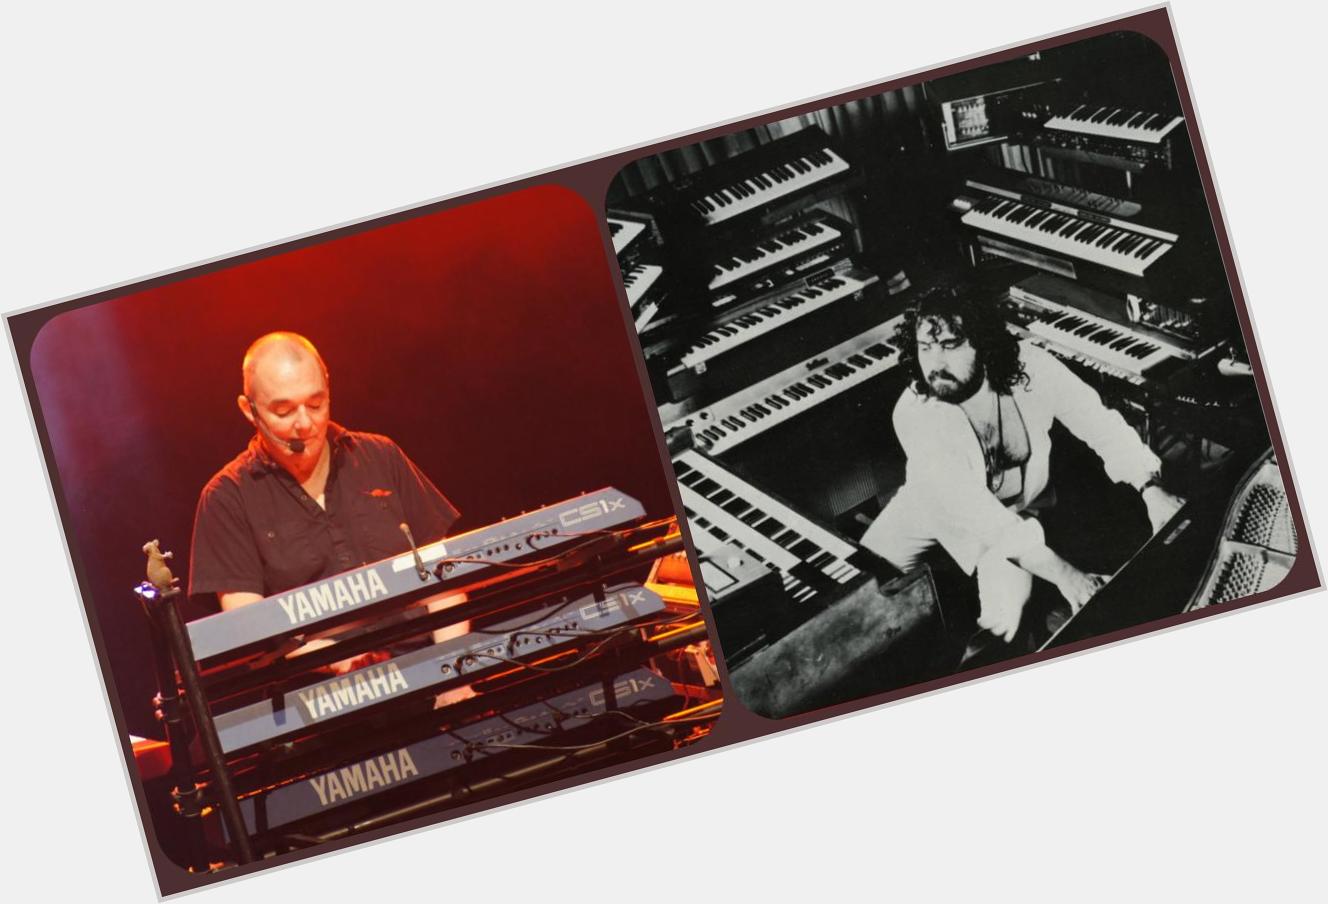 A very synthy shared birthday: happy returns to Vangelis AND to The Stranglers keyboardist Dave Greenfield. 